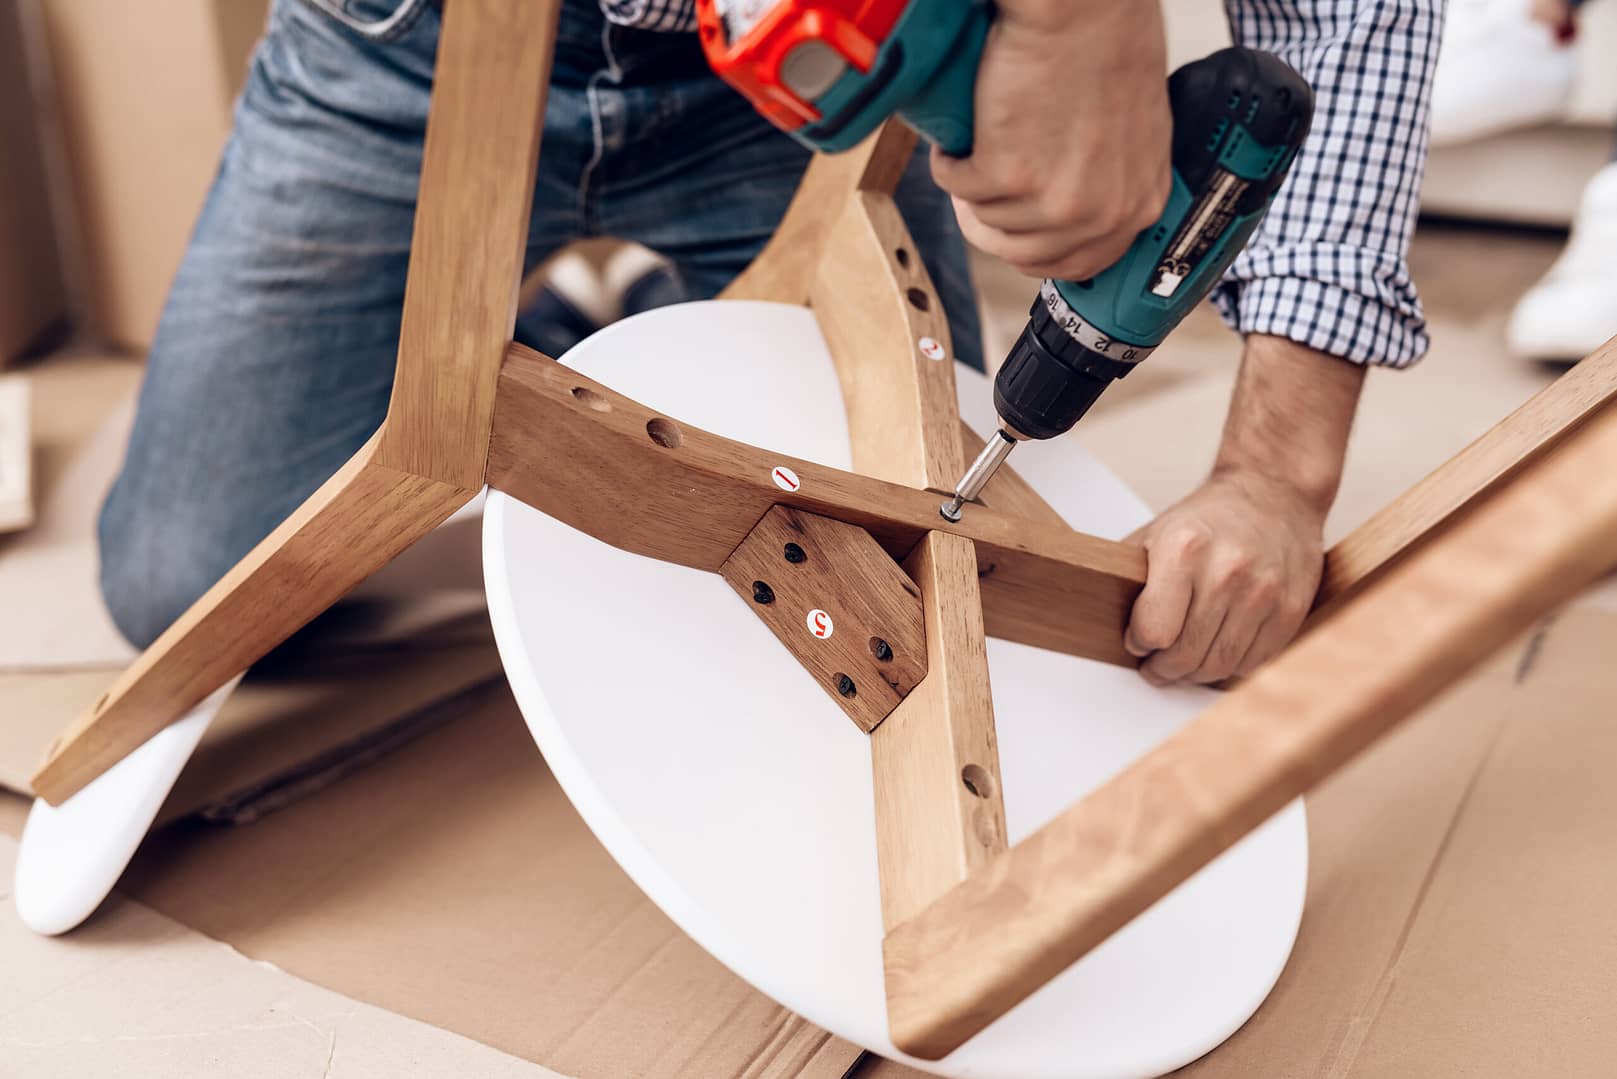 A handyman is assembling a chair, carefully joining its parts together.